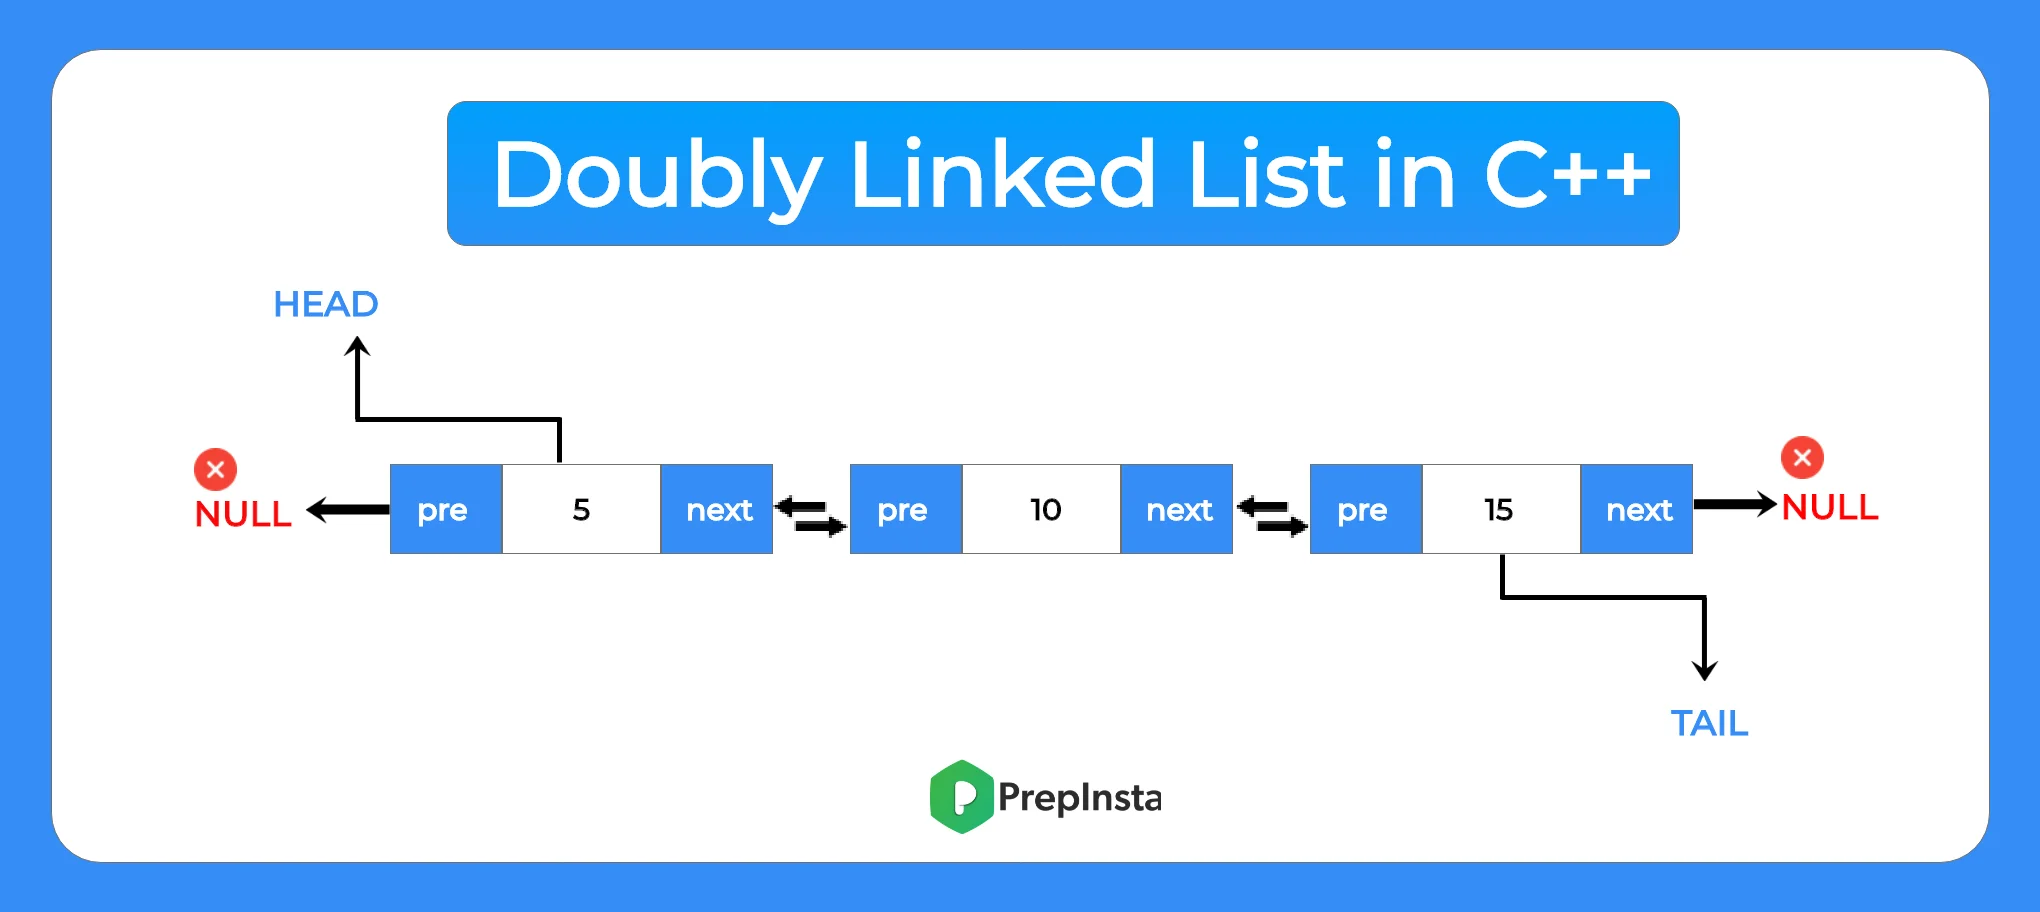 Doubly Linked List in C++ programming